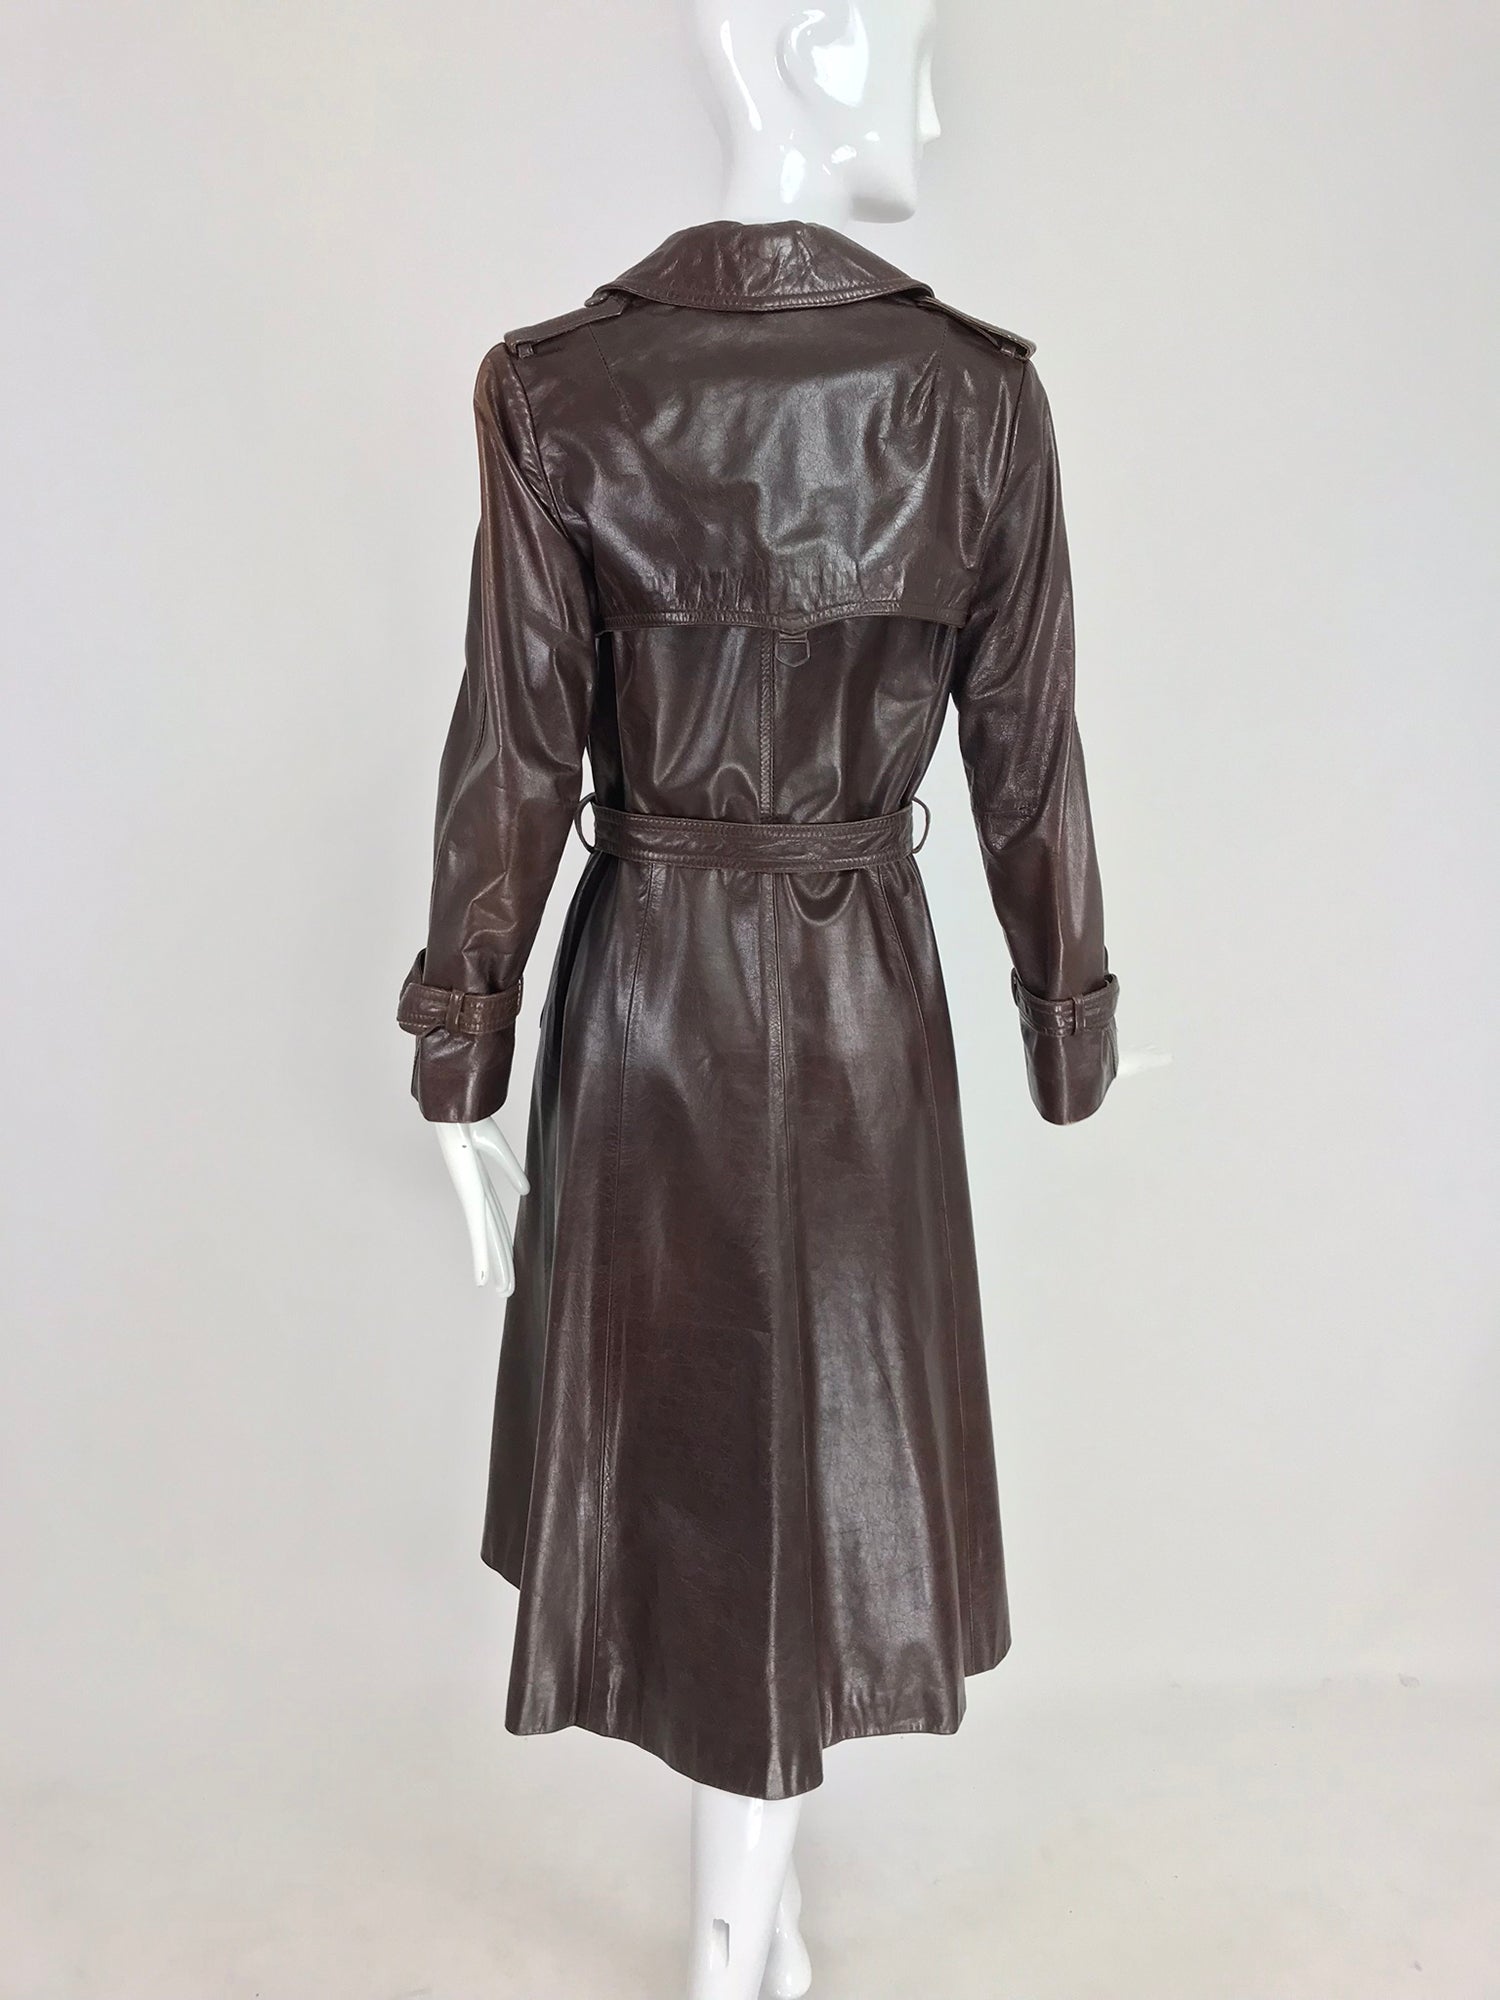 Anne Klein Chocolate brown leather trench coat 1970s – Palm Beach Vintage